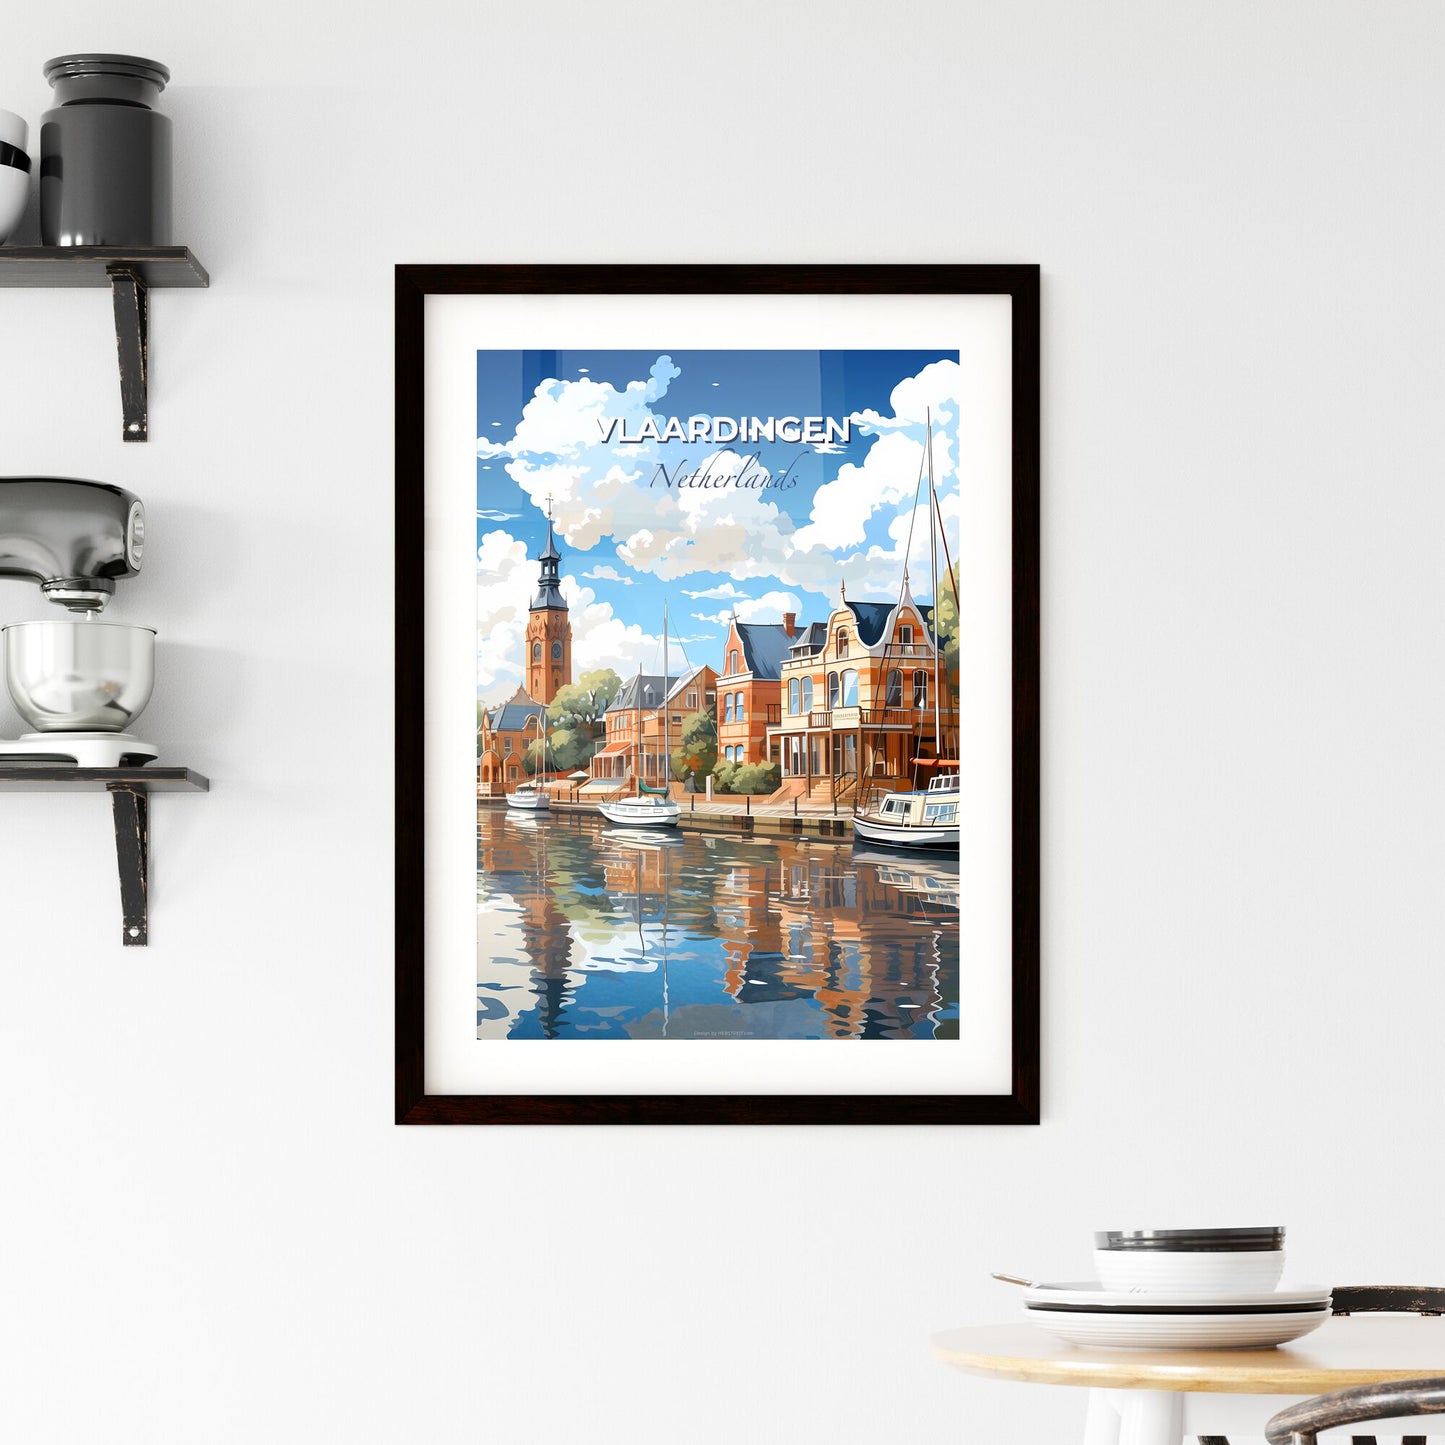 Vlaardingen, Netherlands, A Poster of a water body of water with boats and buildings Default Title